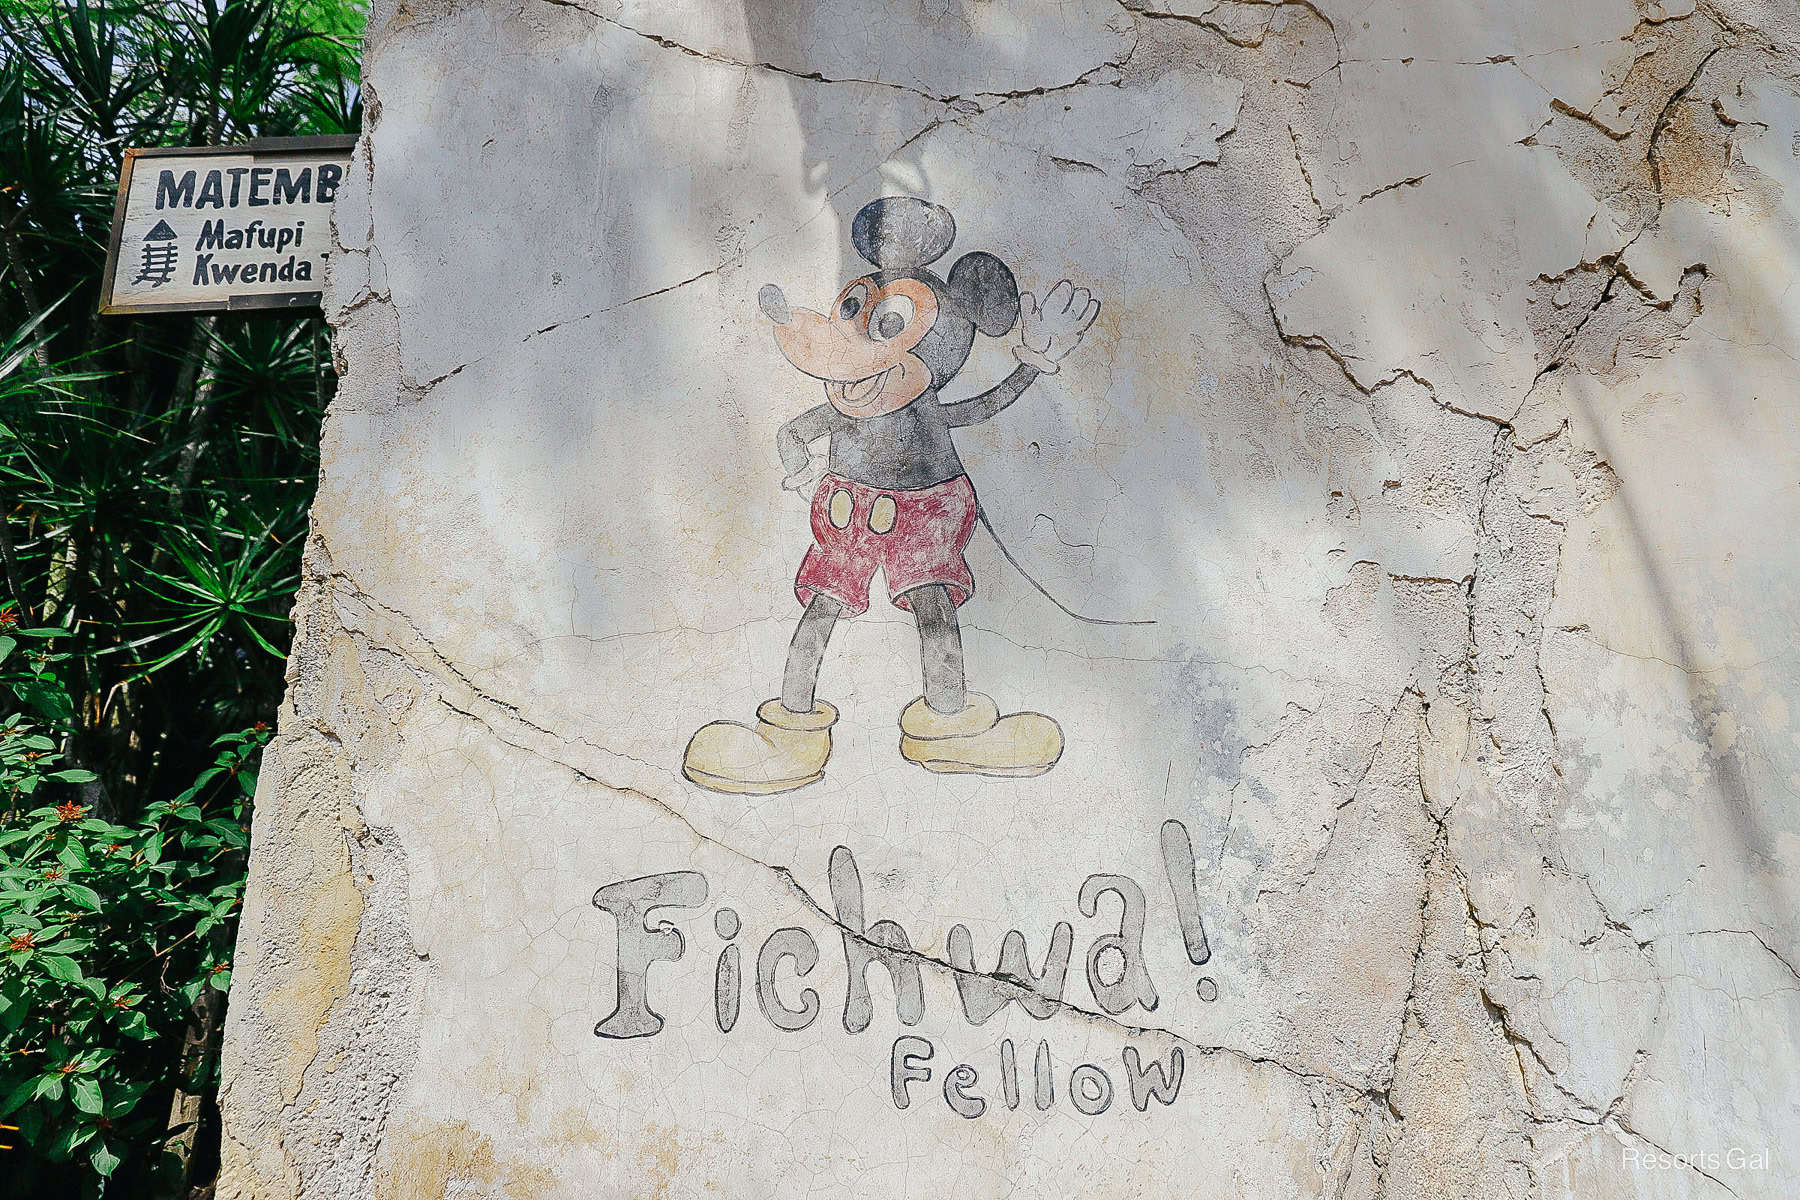 A not so hidden Mickey mural waves. The mural reads Fichwa Fellow. 